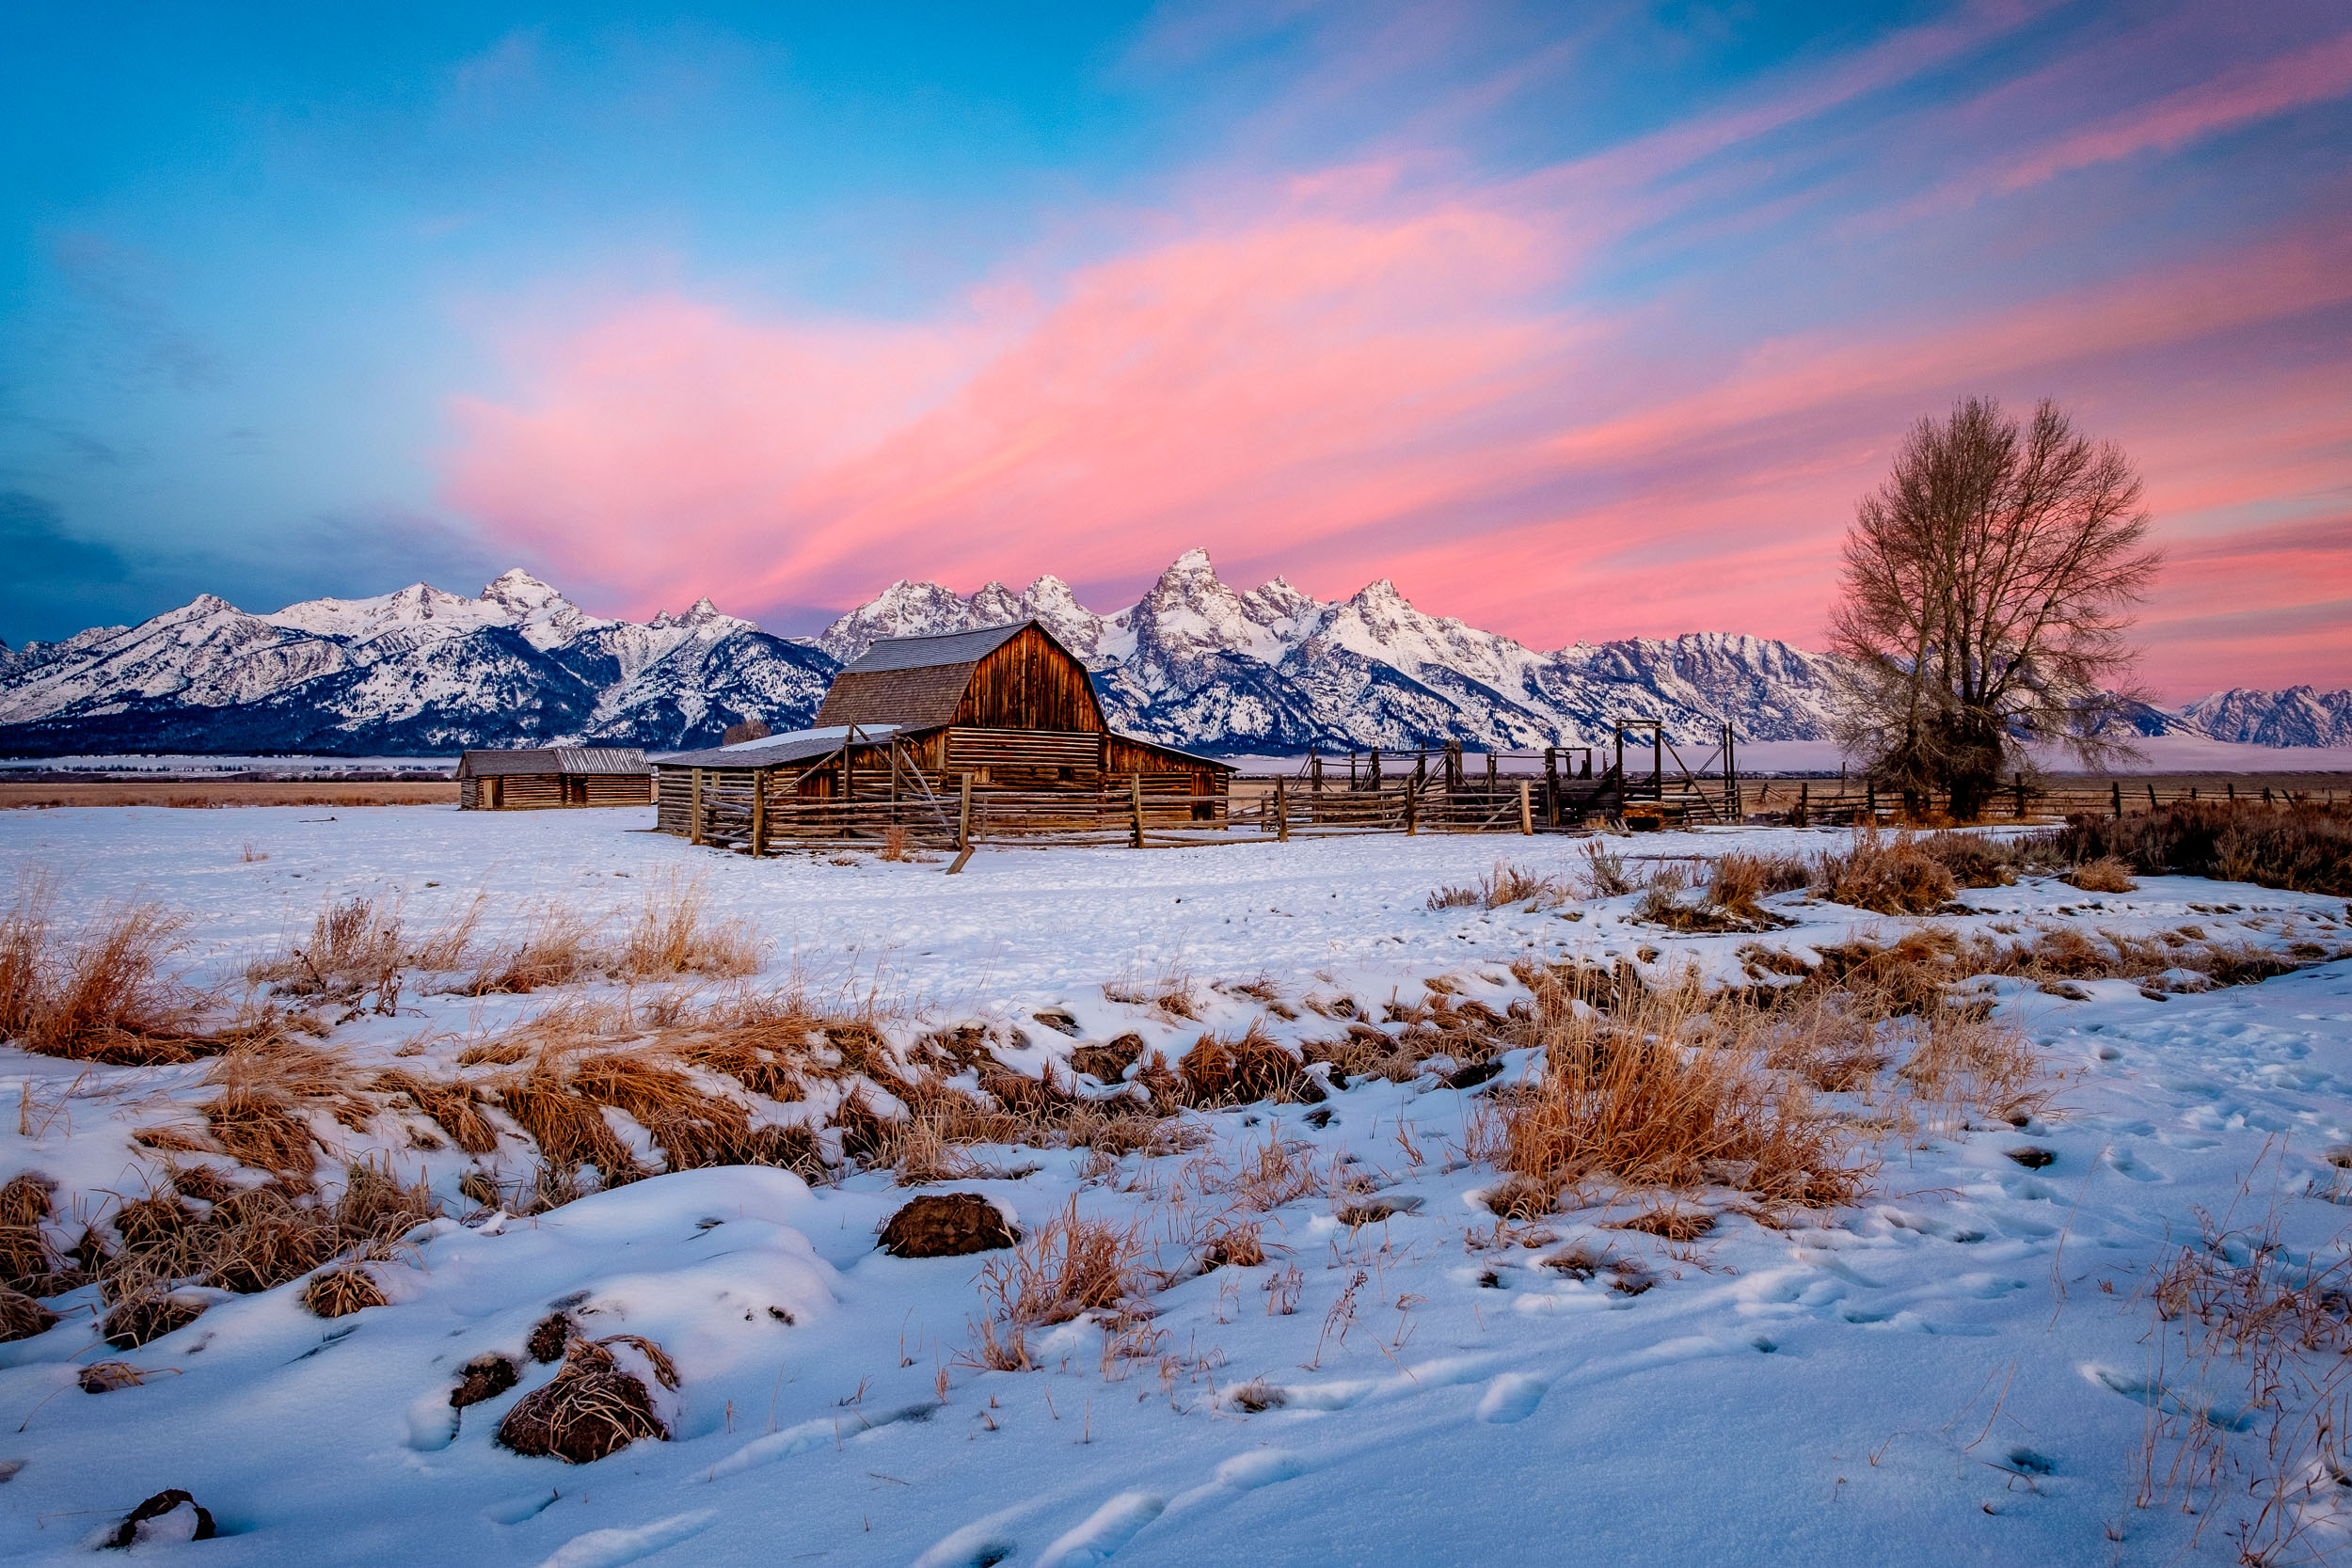  This was one of those perfect days with color in the sky. Boy it was cold. As we drove up on Mormon Row, the crowd of photographers were at the Thomas Moulton Barn. No one else had made the trek down toward John’s barn so we headed down. I like to t